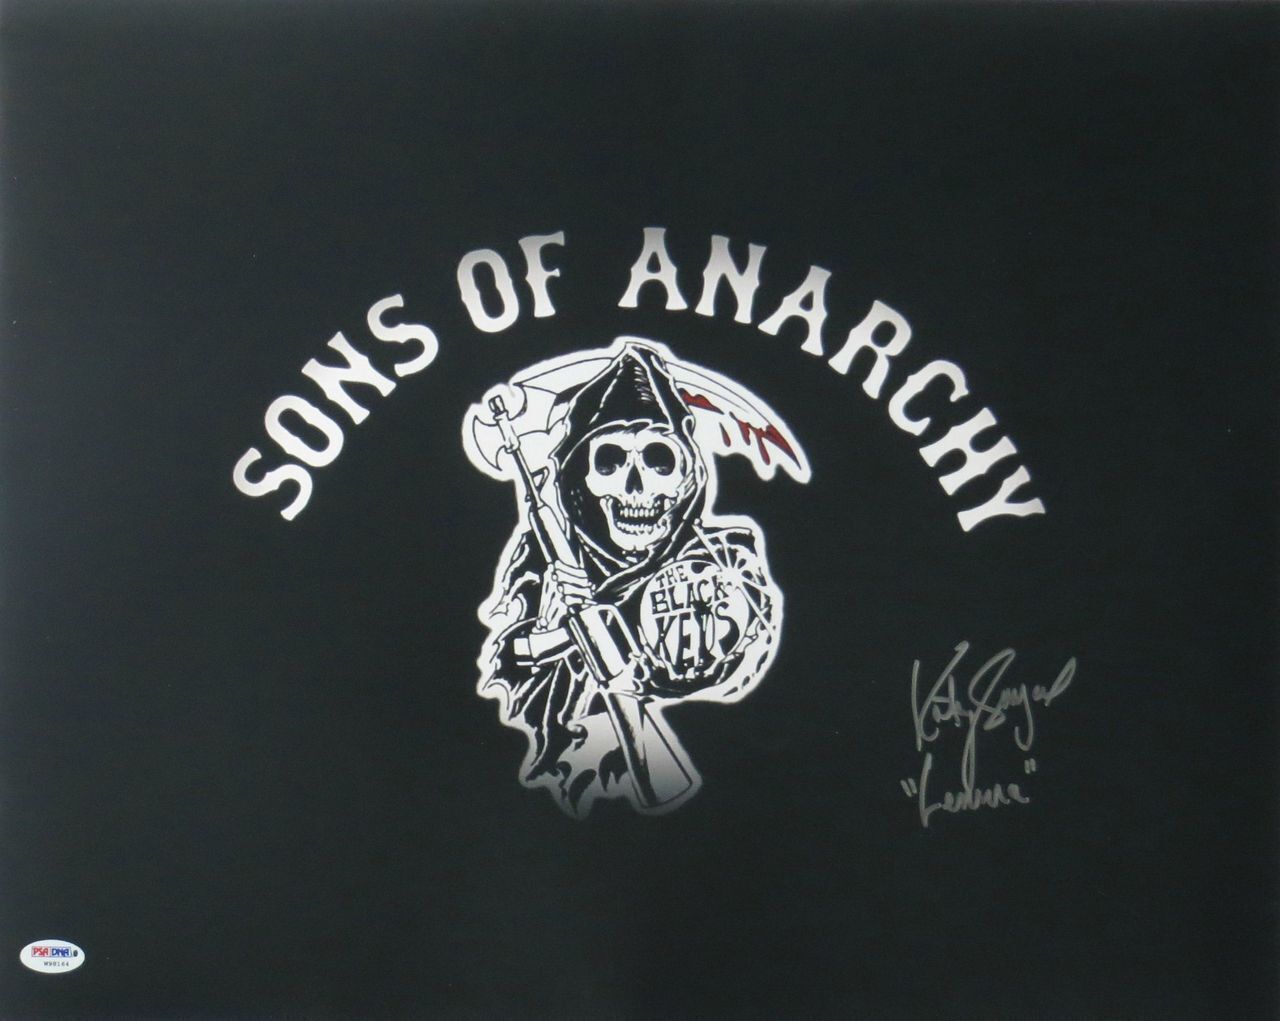 Katey Sagal Signed Sons of Anarchy Authentic Autographed 16x20 Photo Poster painting PSA/DNA COA